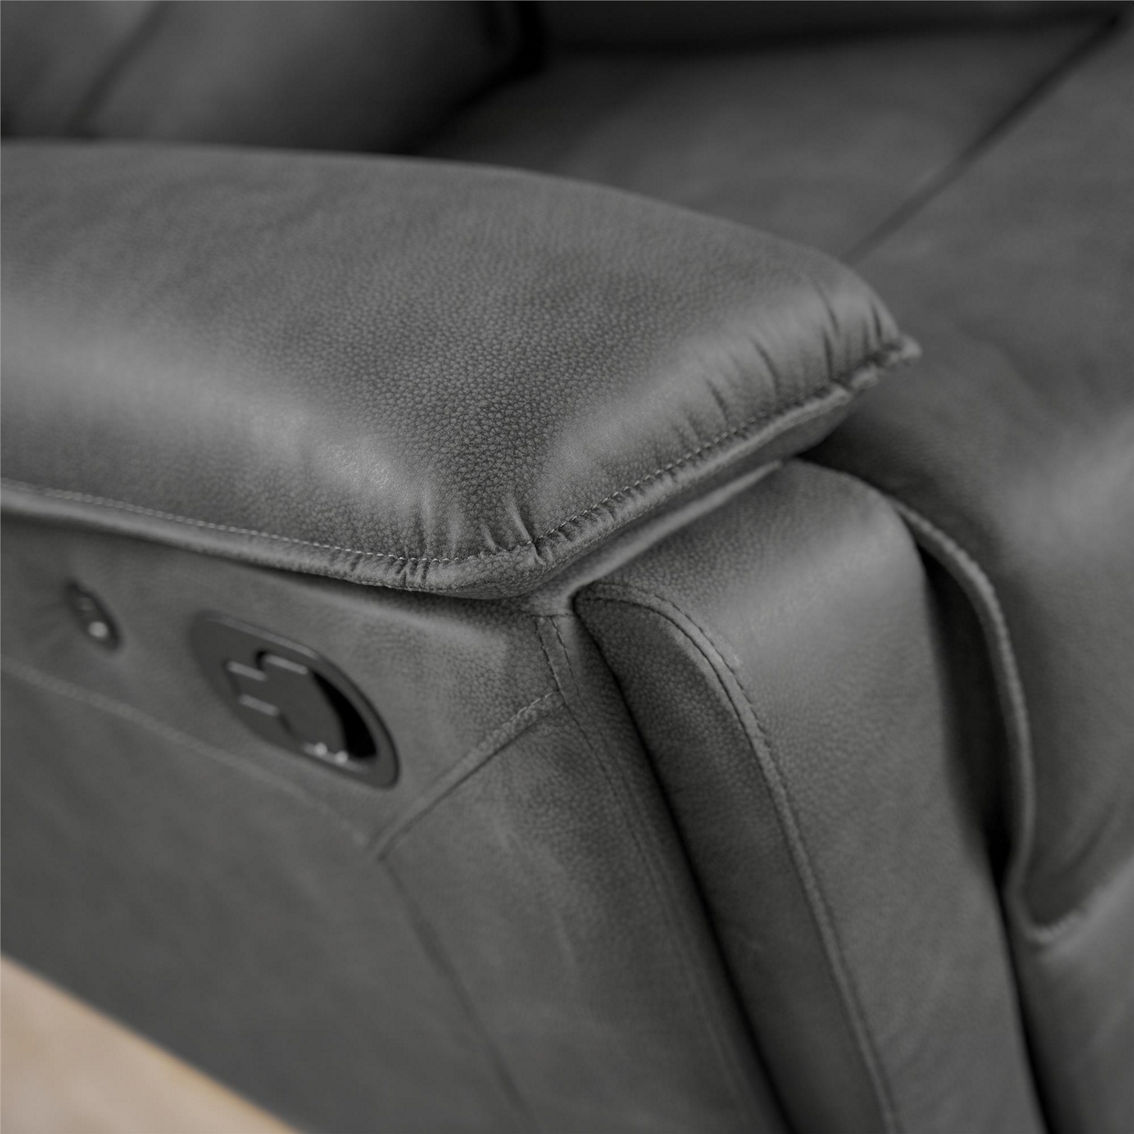 DHP Labatte Recliner with Dual USB Port, Charcoal Faux Leather - Image 8 of 8